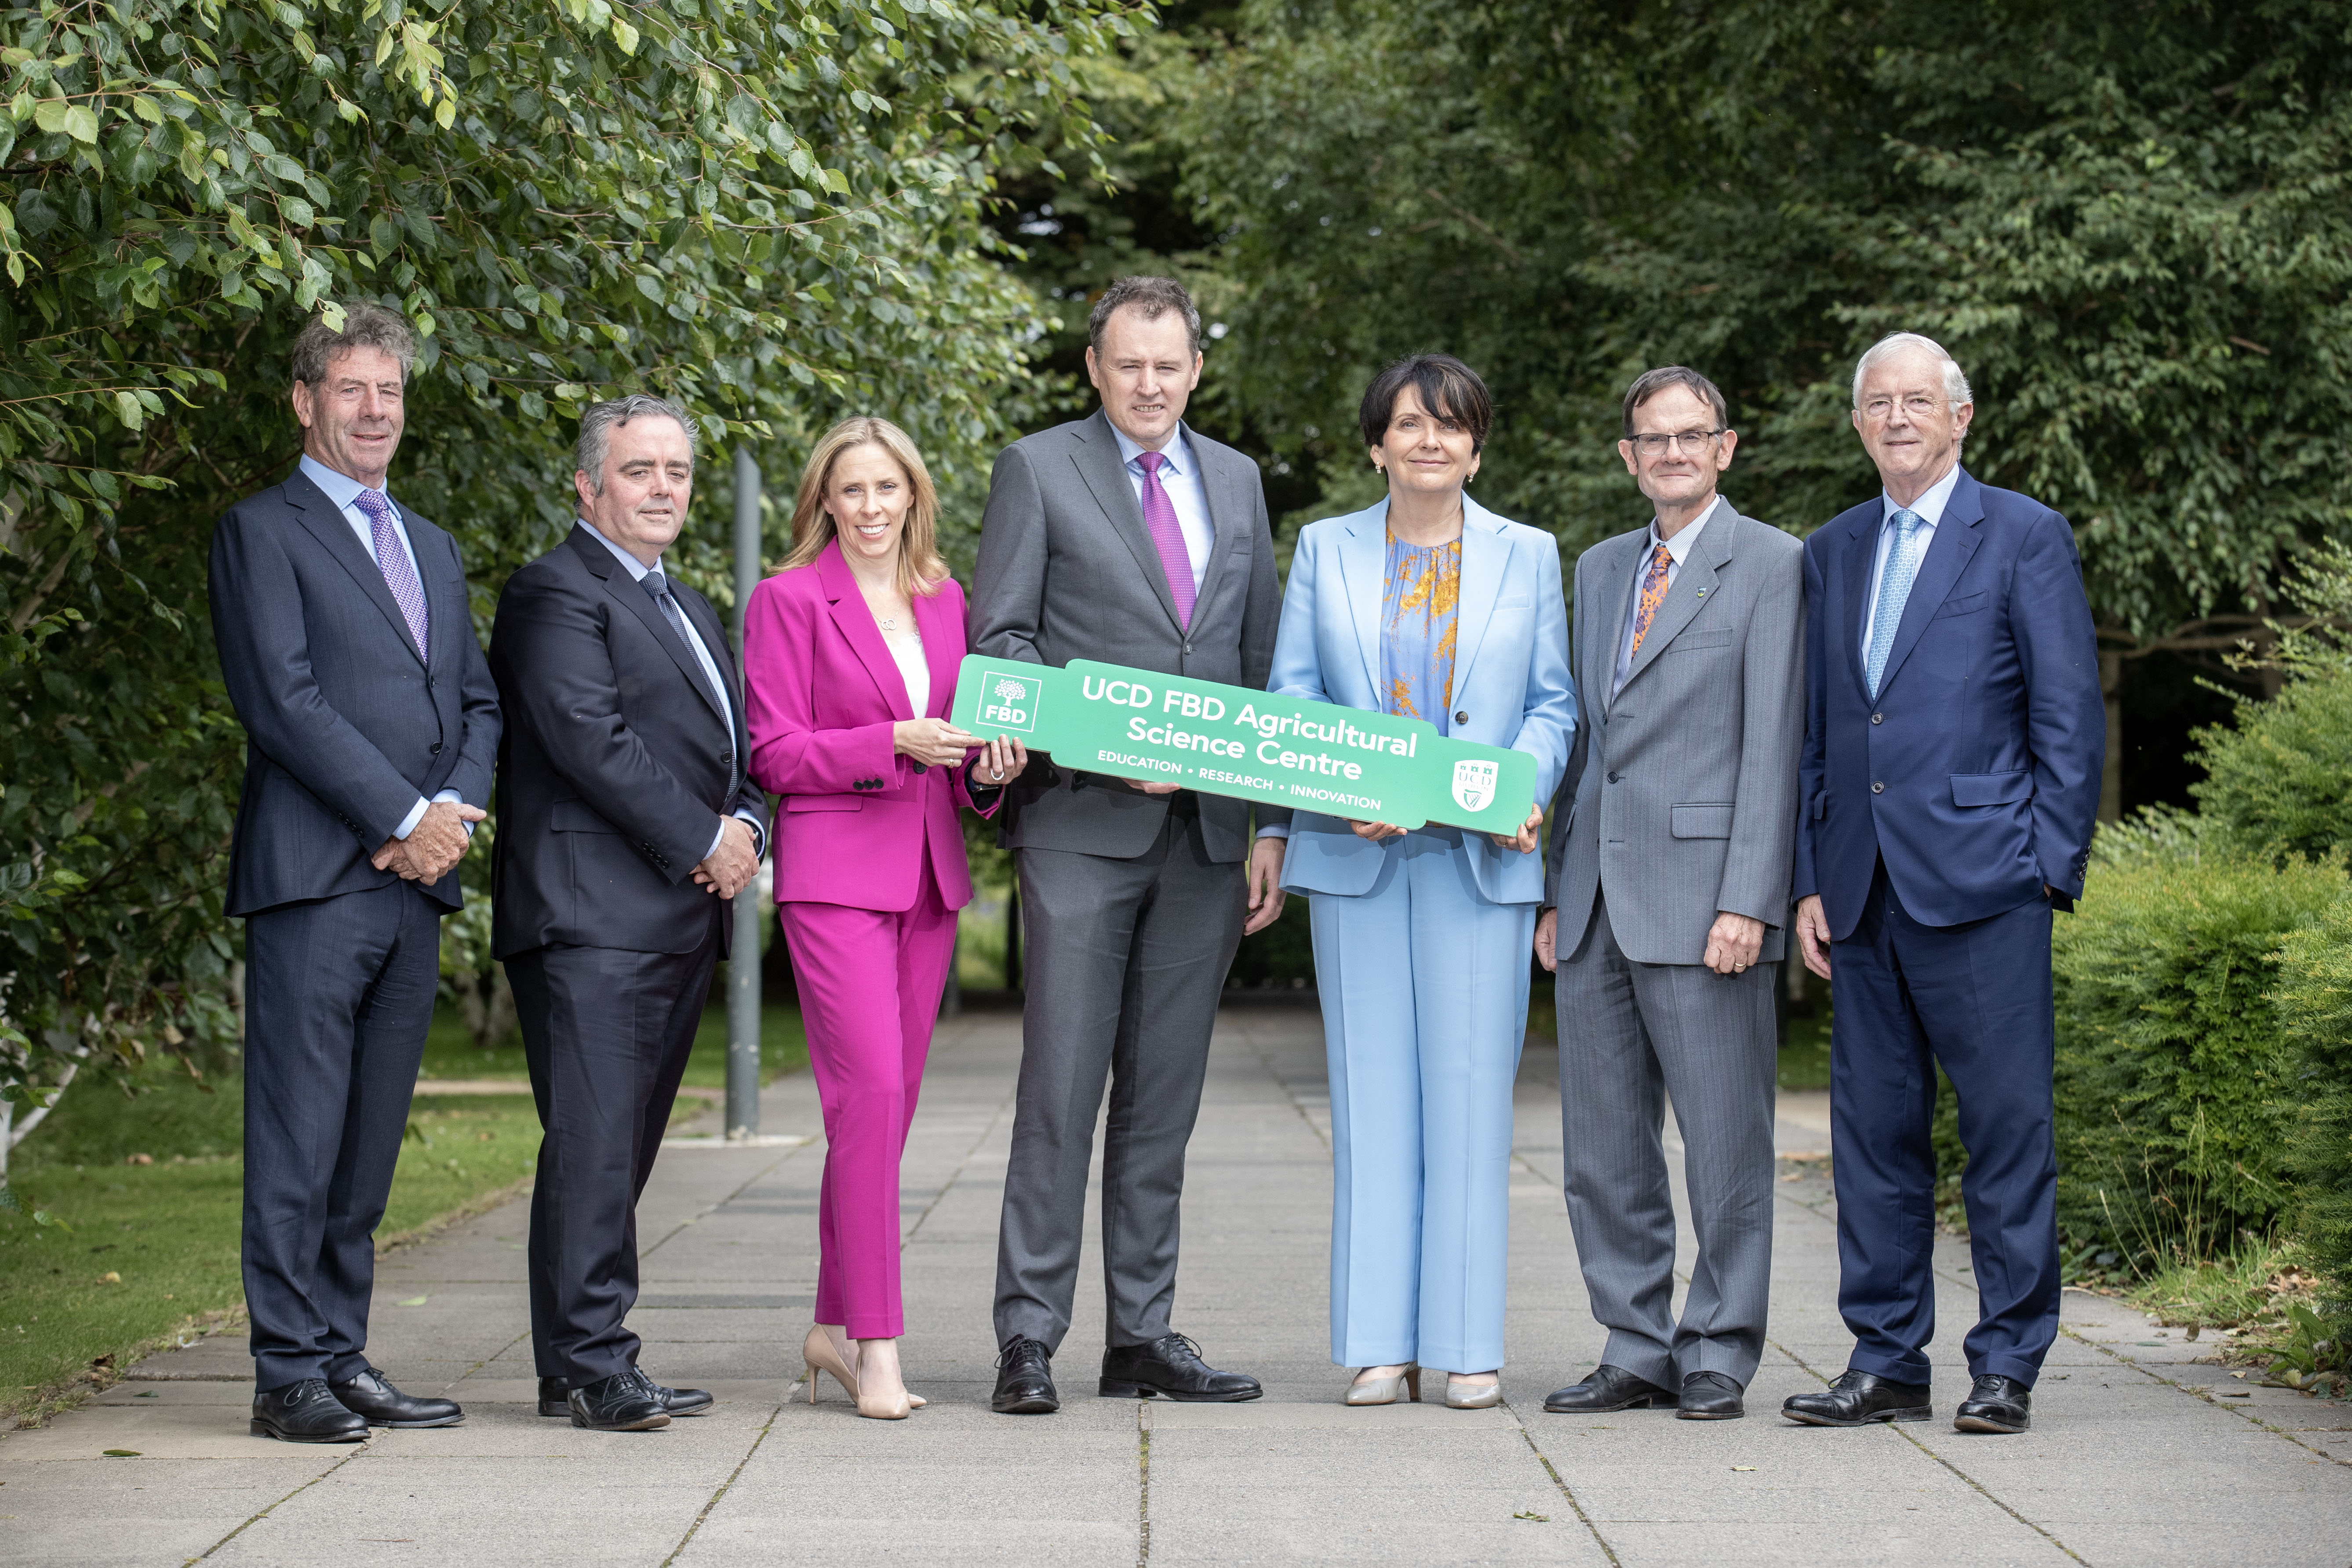 UCD & FBD announce new agricultural research & education centre at Lyons Farm